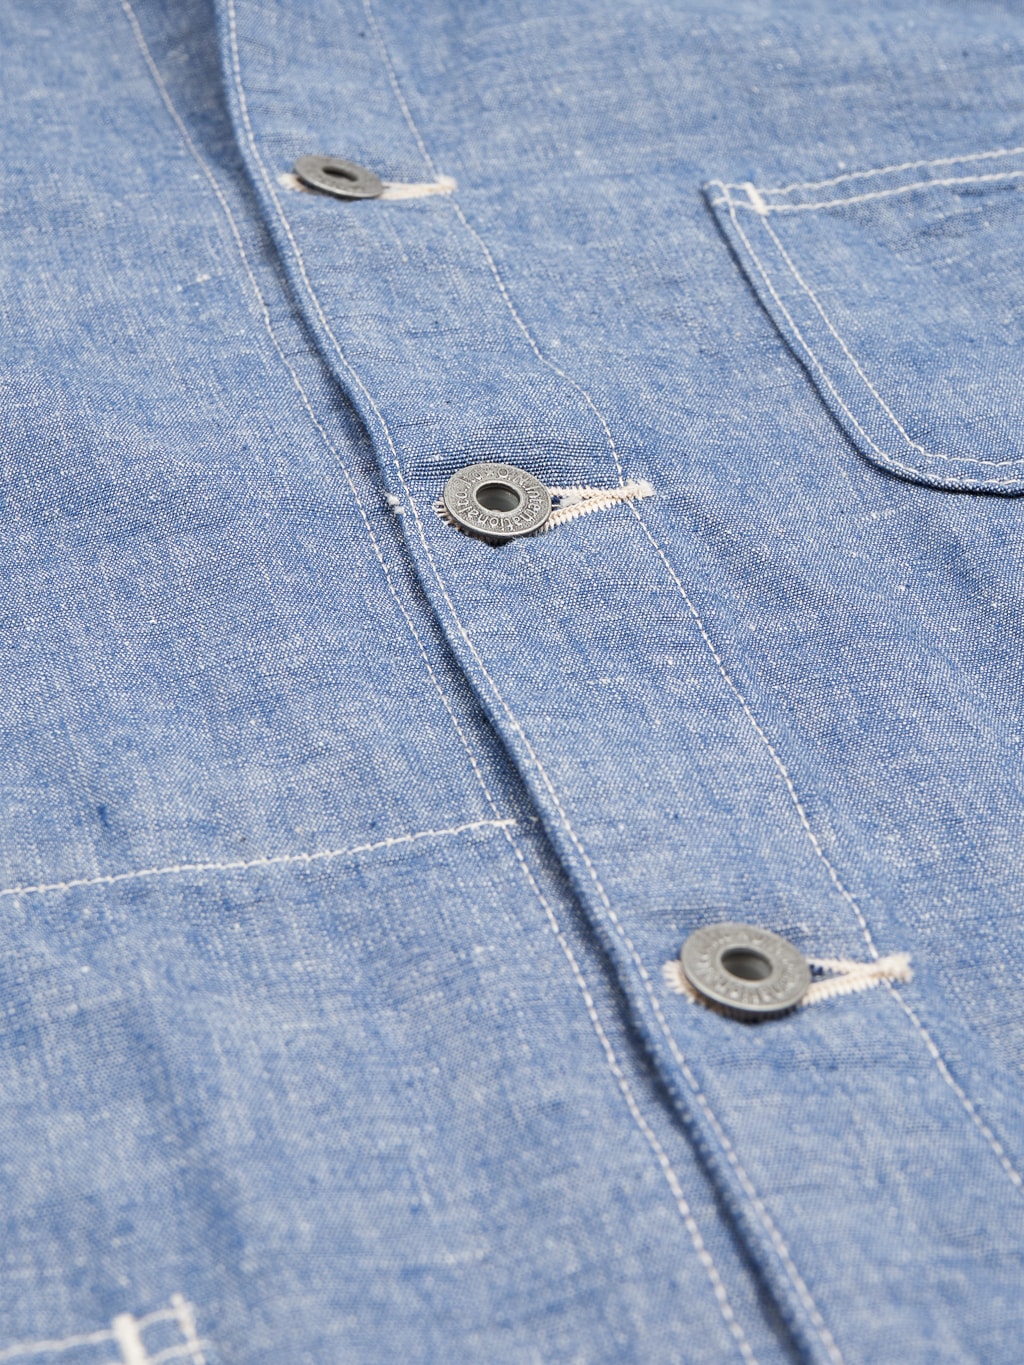 Oni denim heavy chambray blue gray coverall donut buttons